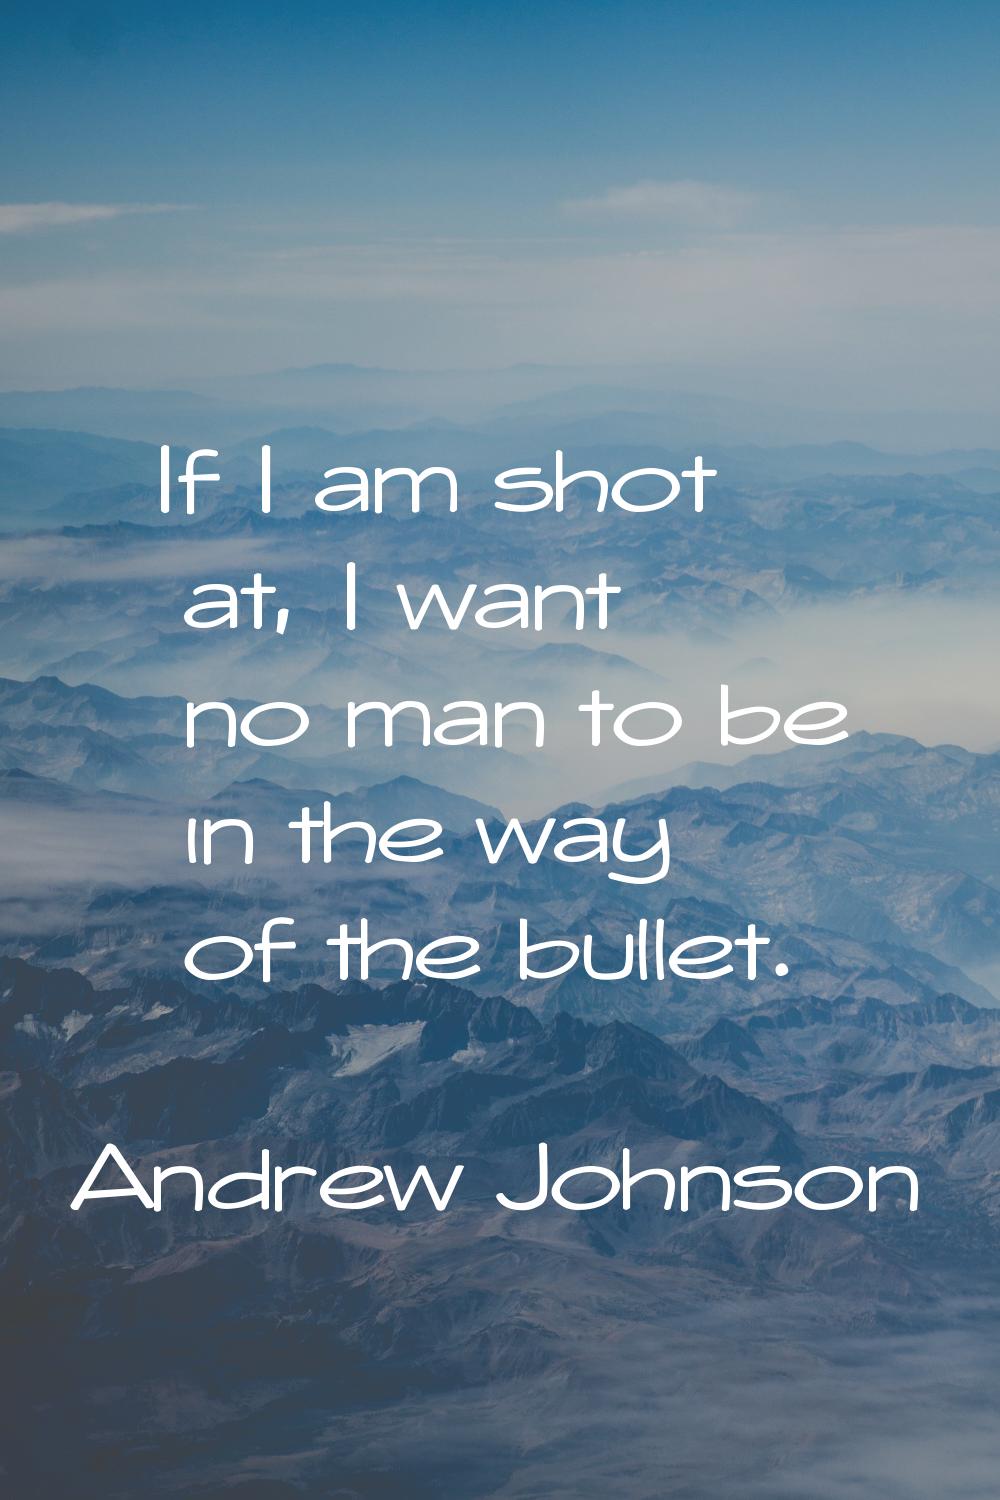 If I am shot at, I want no man to be in the way of the bullet.